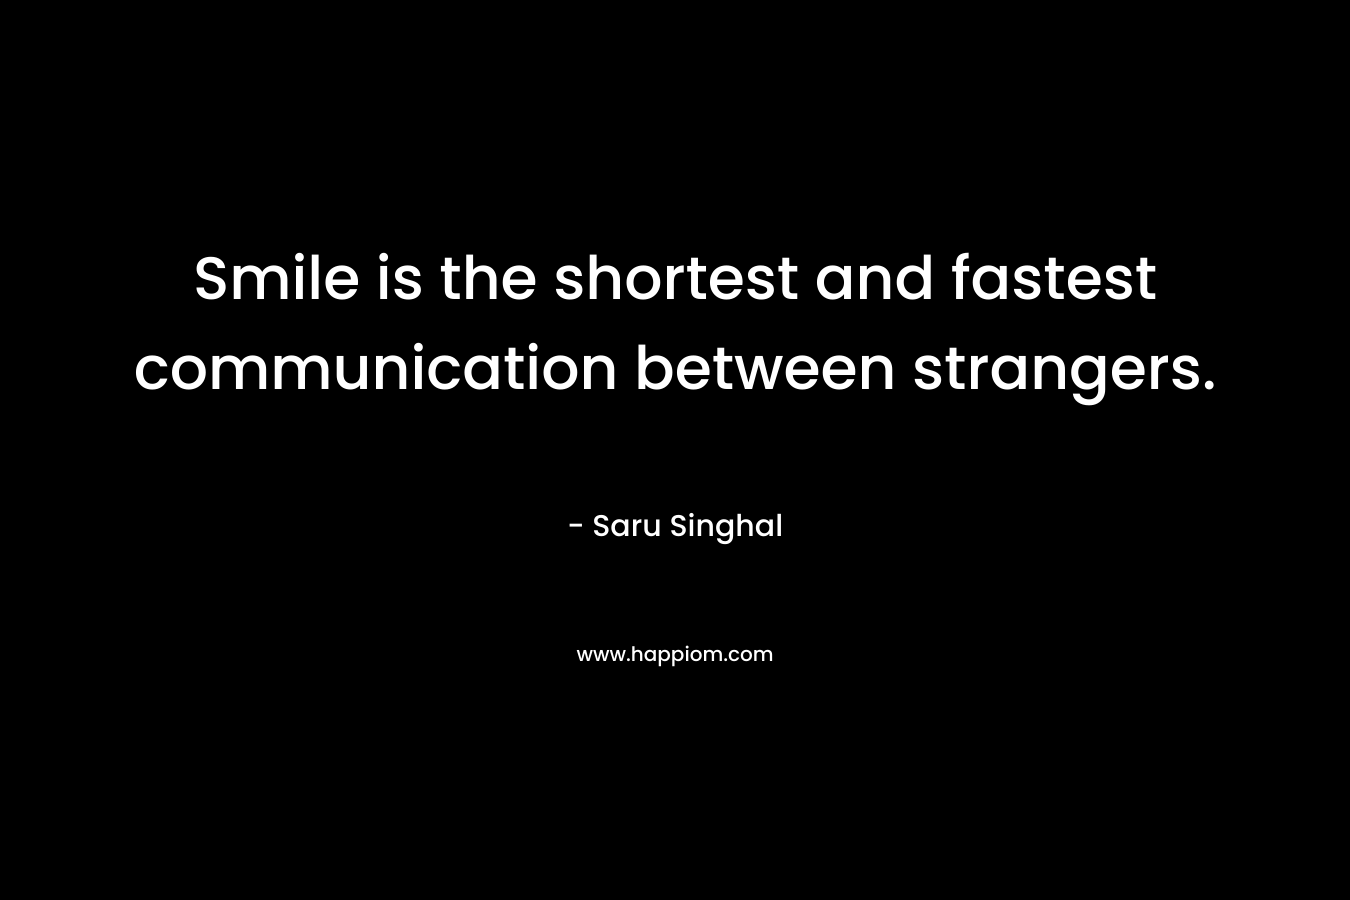 Smile is the shortest and fastest communication between strangers. – Saru Singhal